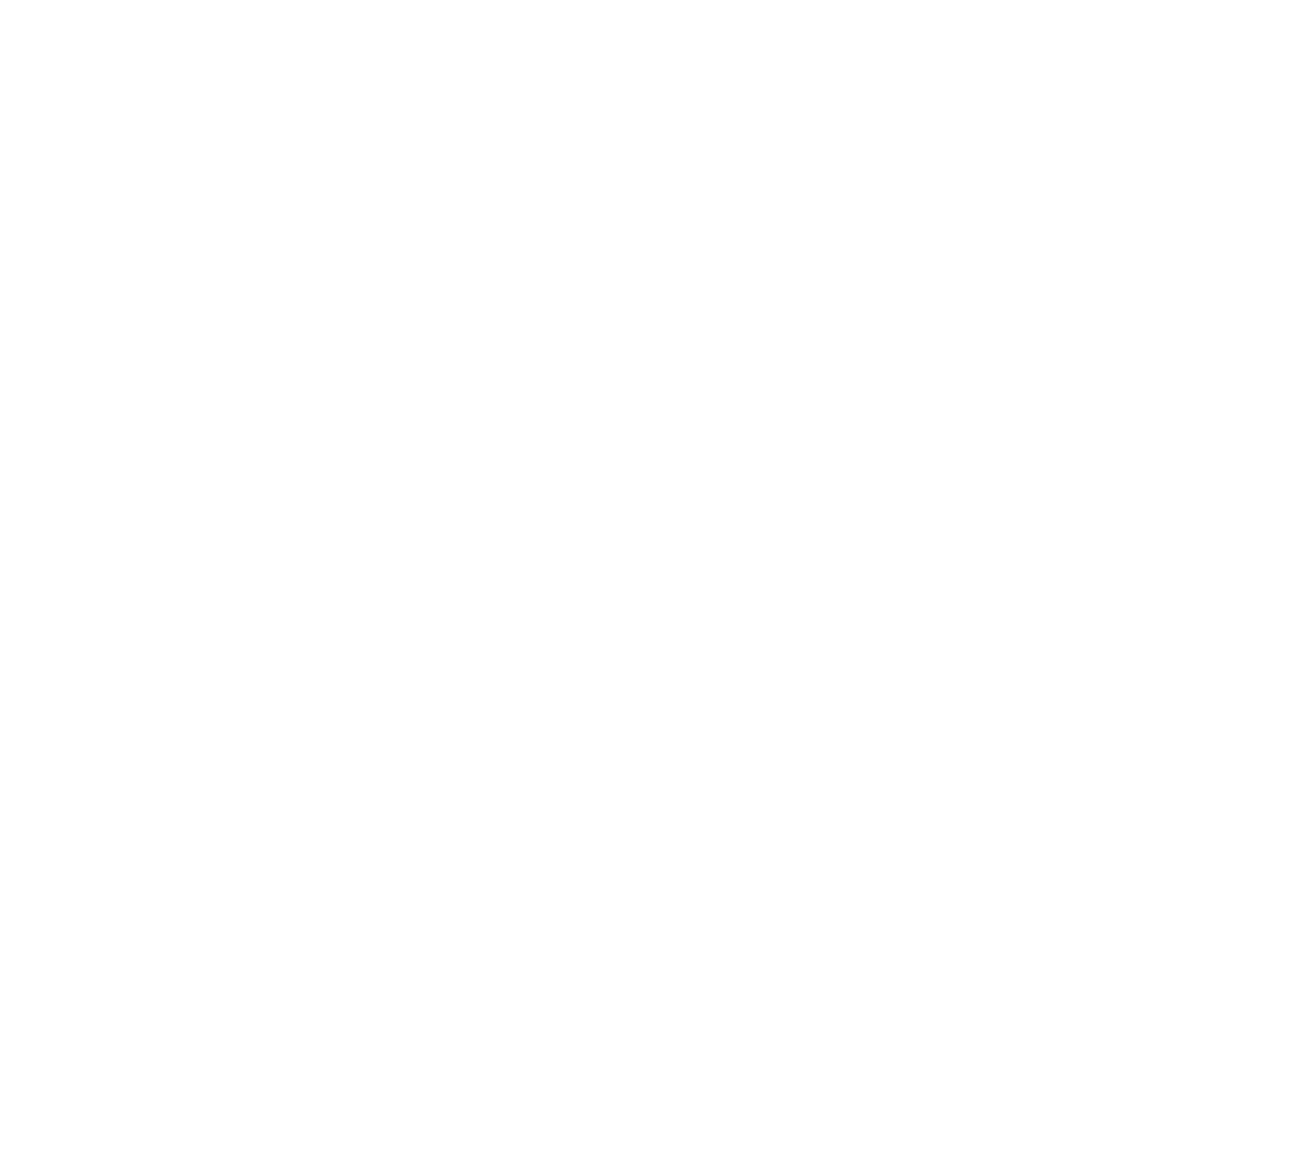 AFLIED